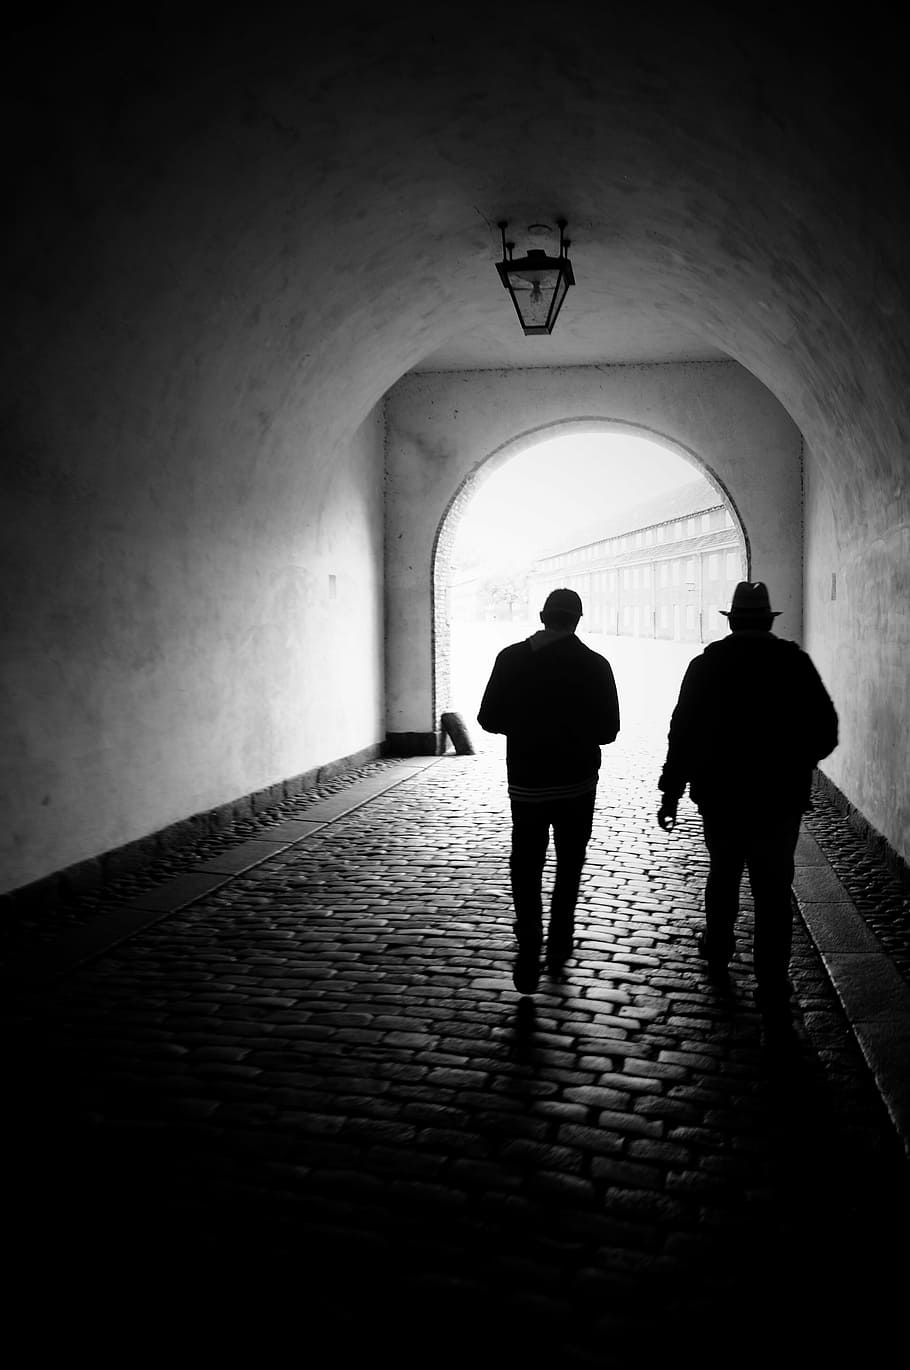 two, person, walk, pathway, christ, detective, spy, shadow, silhouette, mysterious